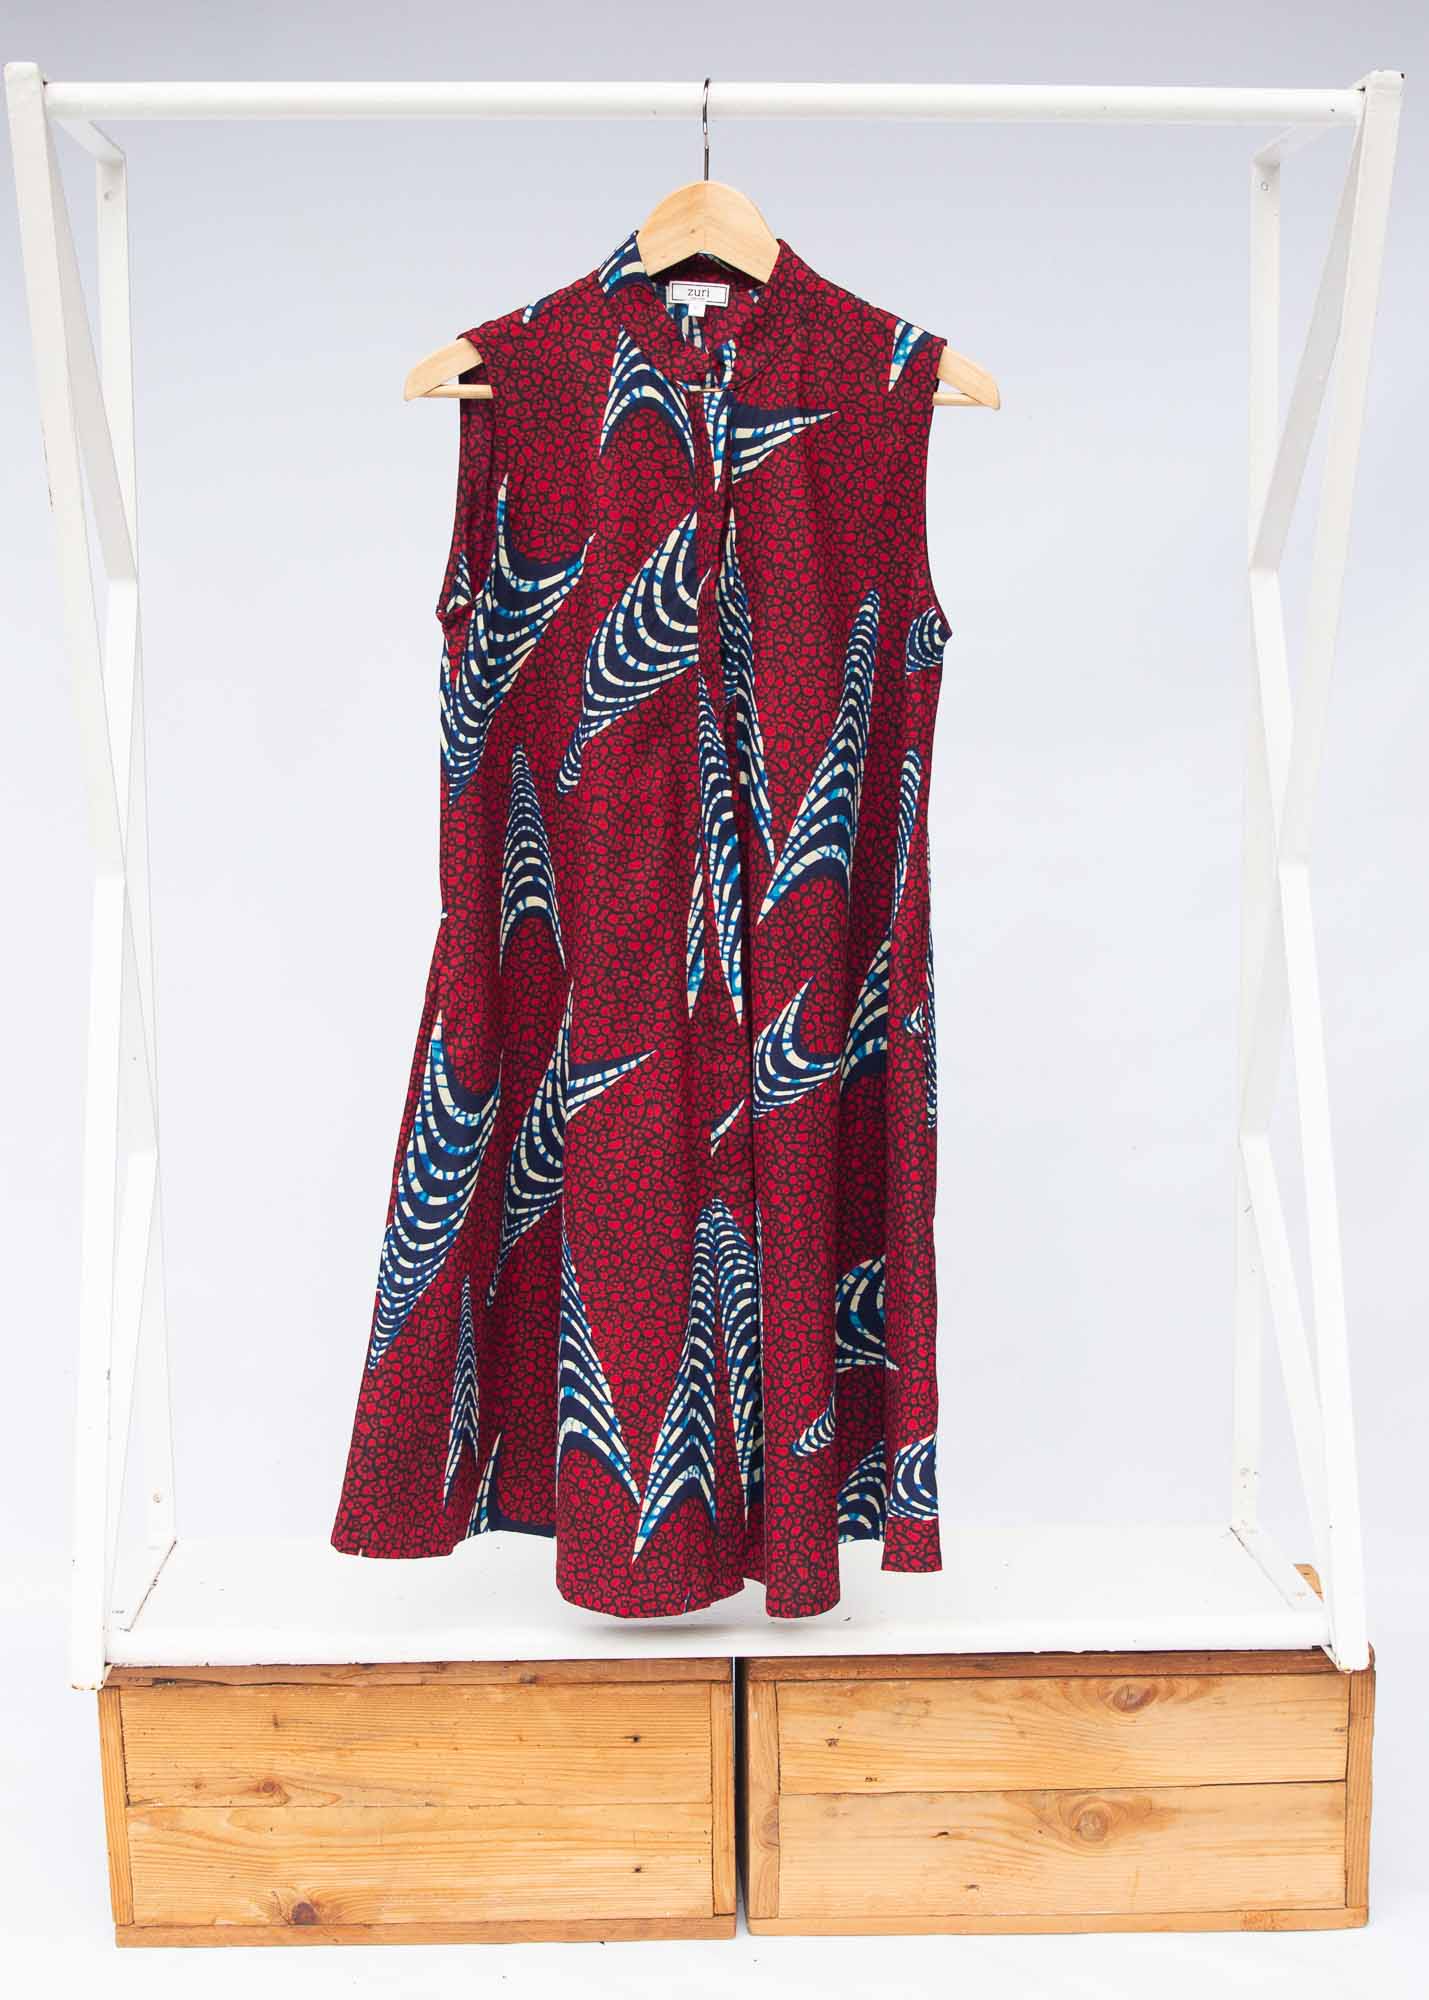 The display of red and black dress with navy blue and beige print